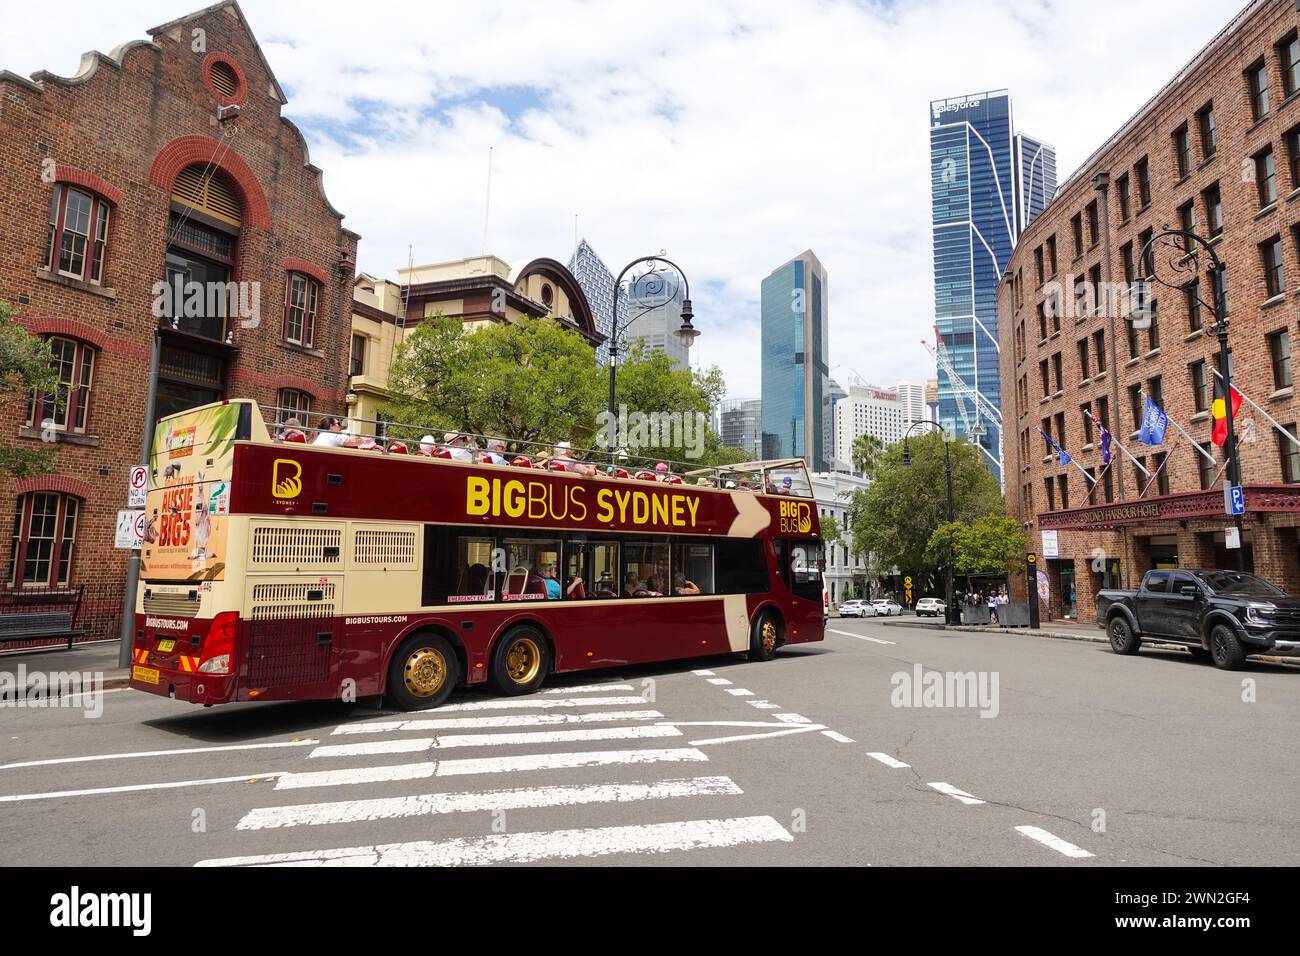 Big Bus Sydney, a double-decker tourist bus exploring the city of Sydney, Australia, with an open roof on a sunny day. Stock Photo